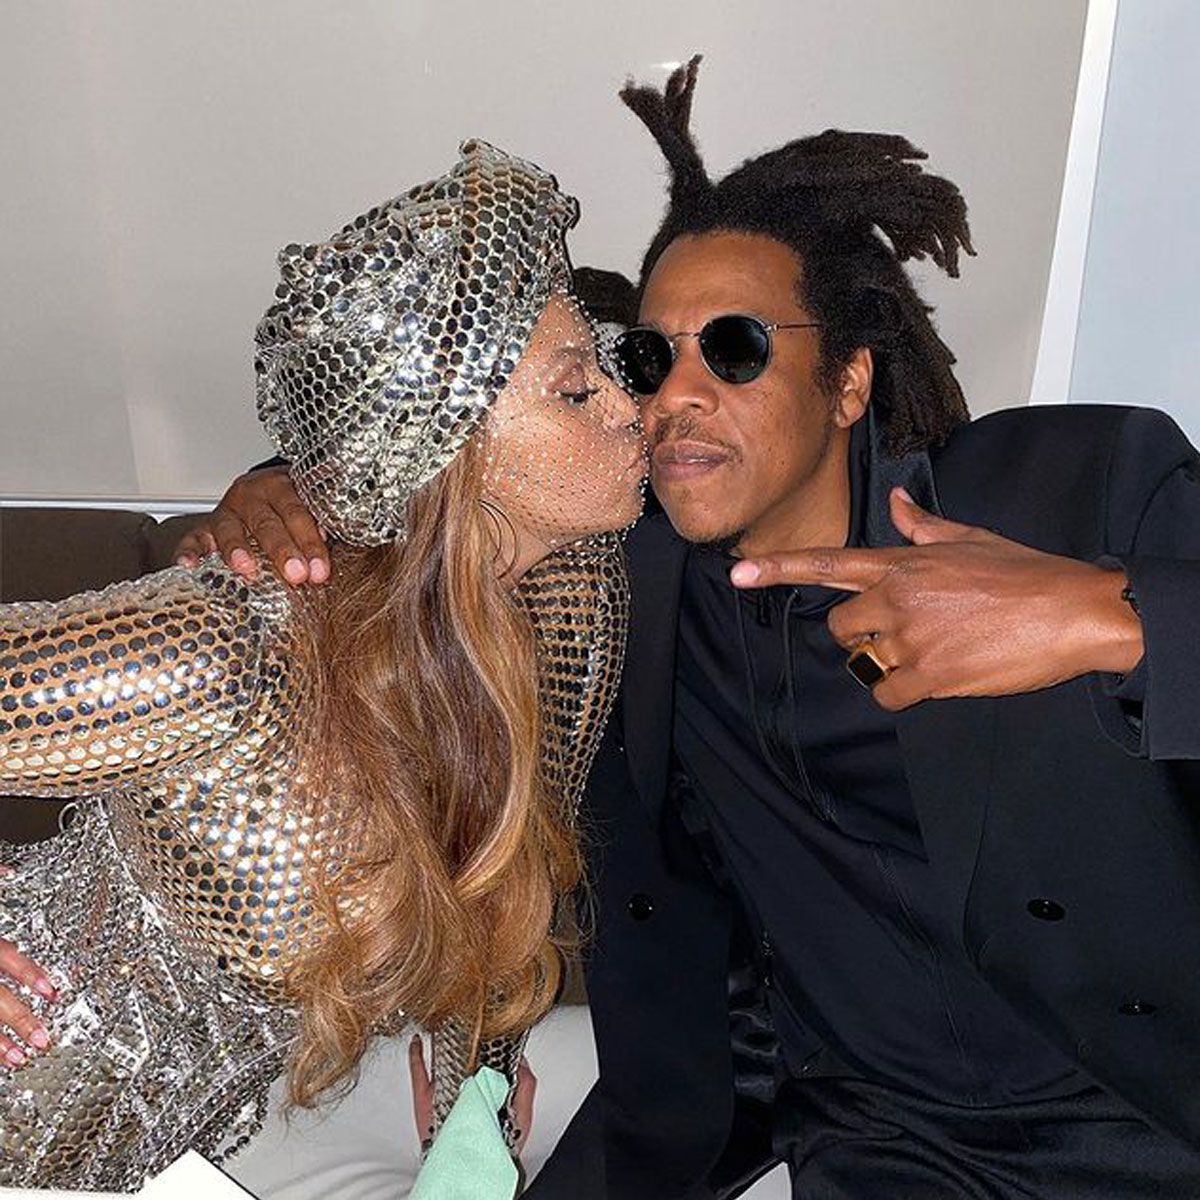 Beyoncé and JayZ Prove They’re Still Crazy in Love in PDA Photos